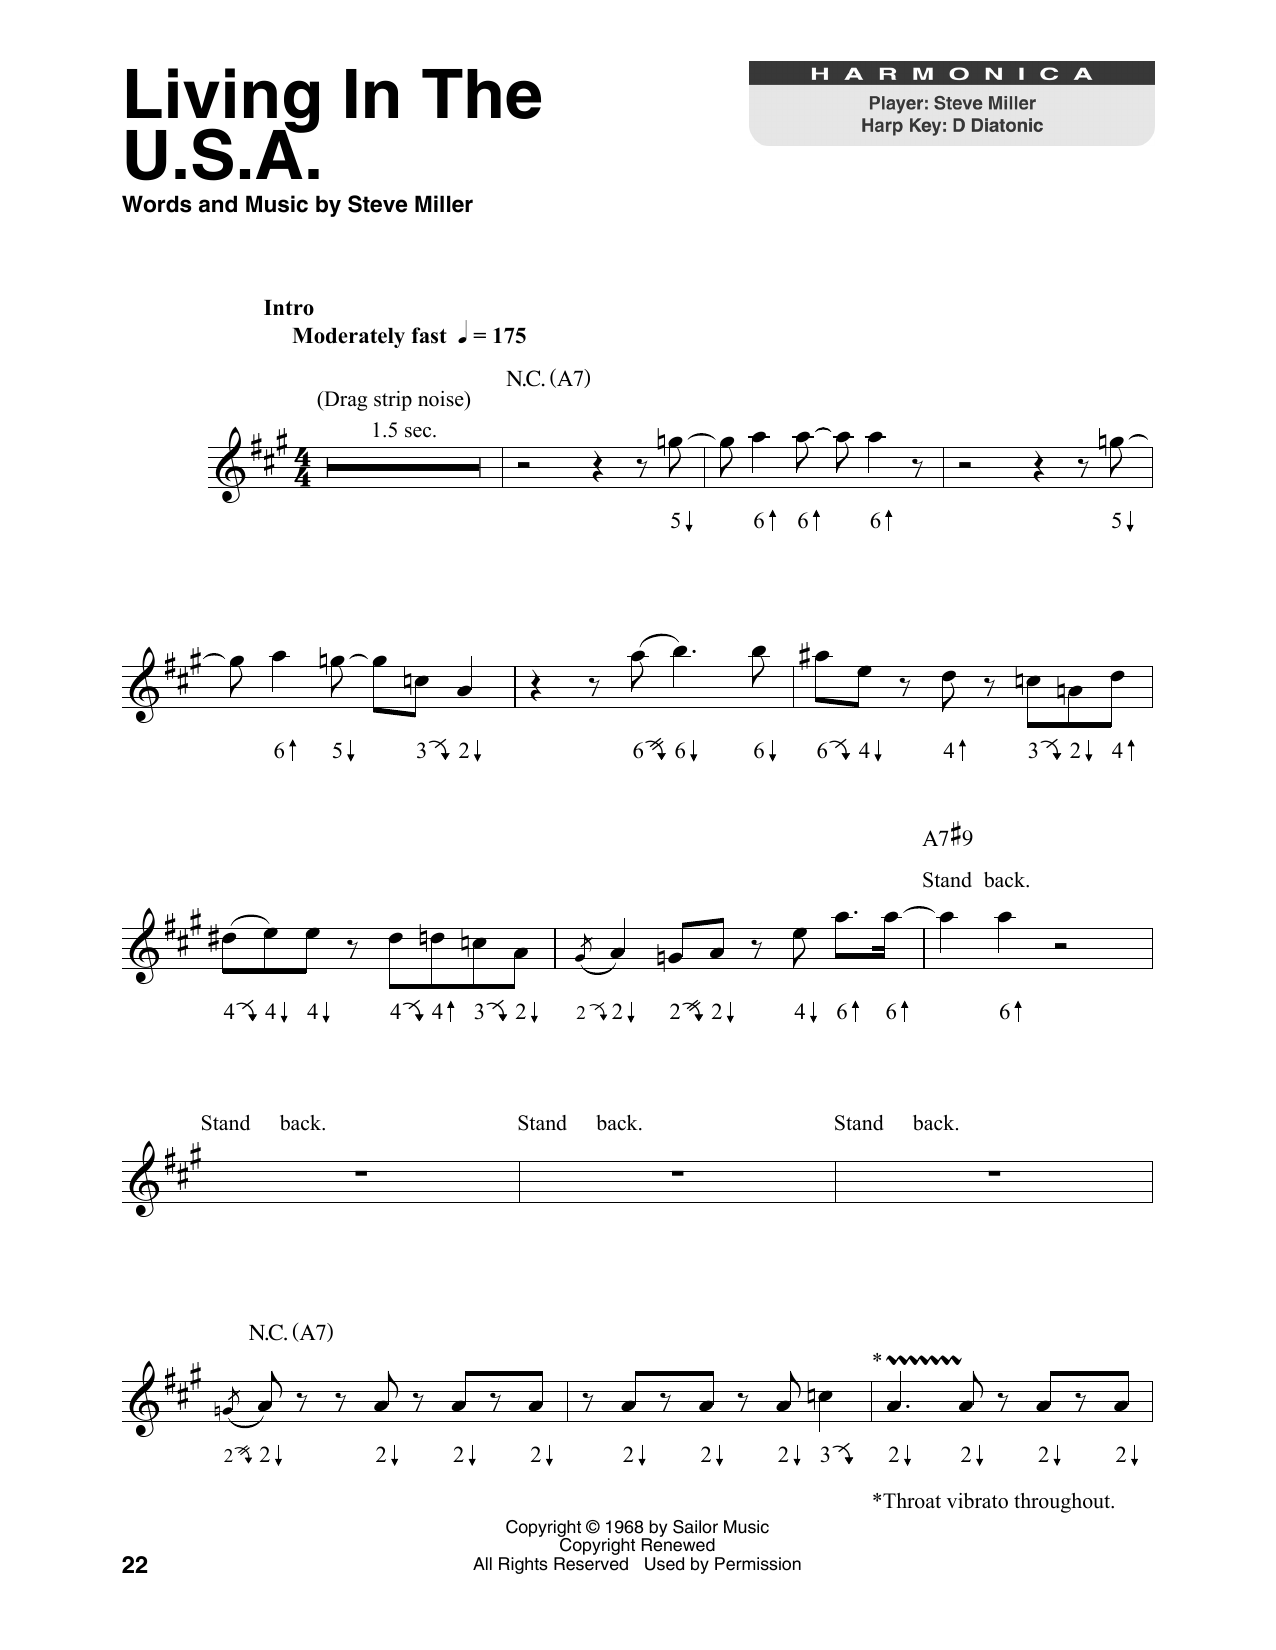 Steve Miller Band Living In The U.S.A. sheet music notes printable PDF score